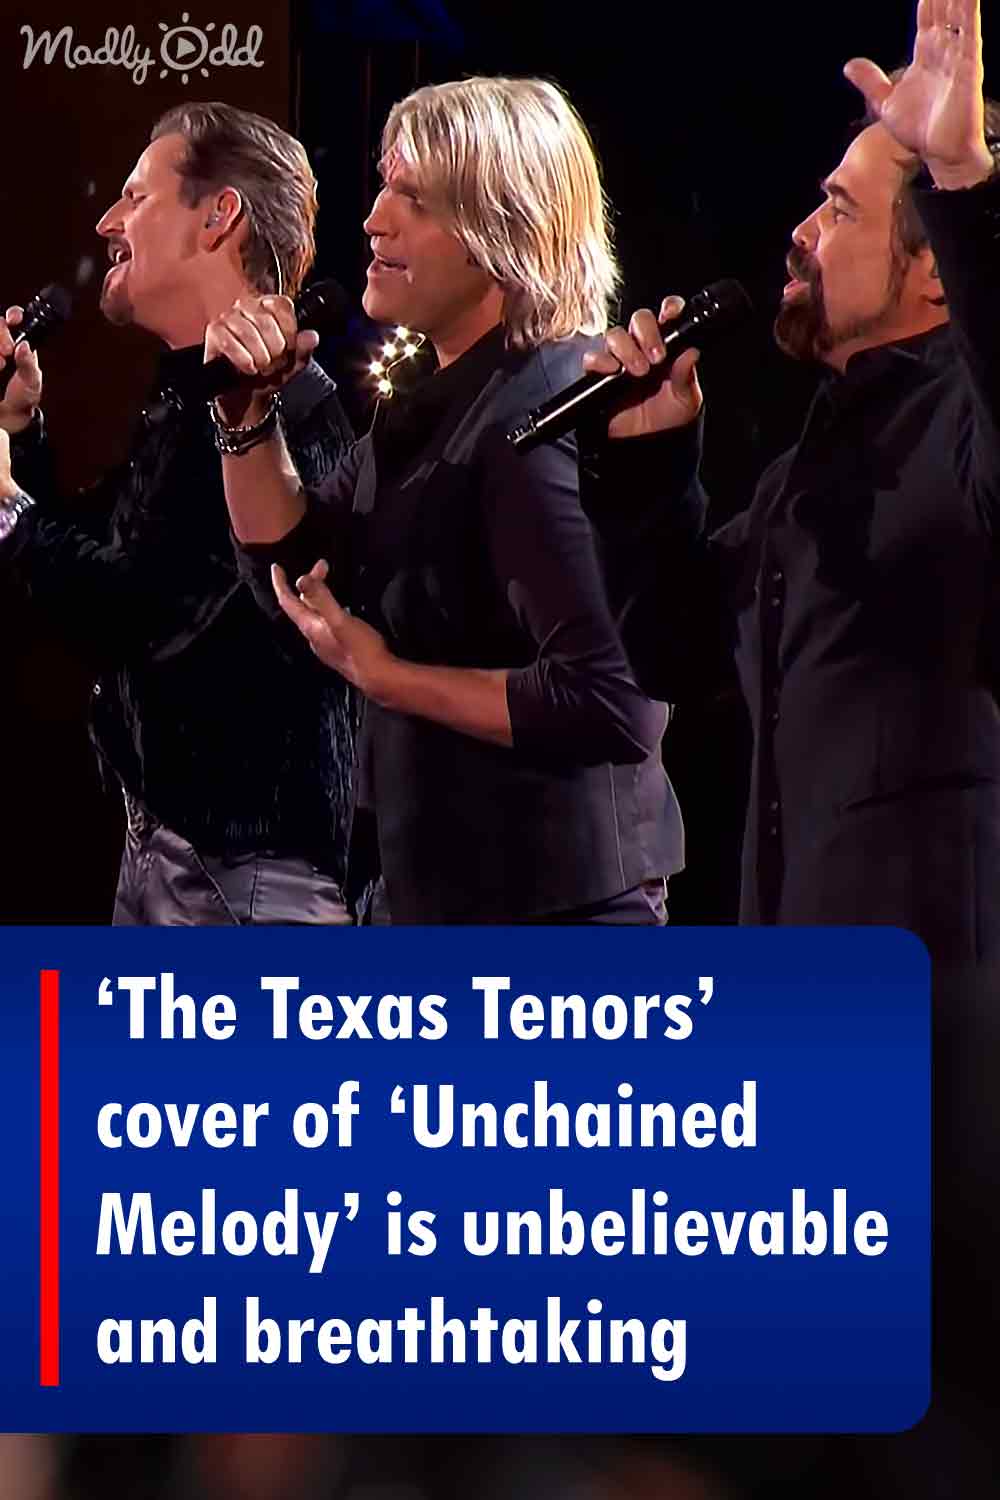 ‘The Texas Tenors’ cover of ‘Unchained Melody’ is unbelievable and breathtaking